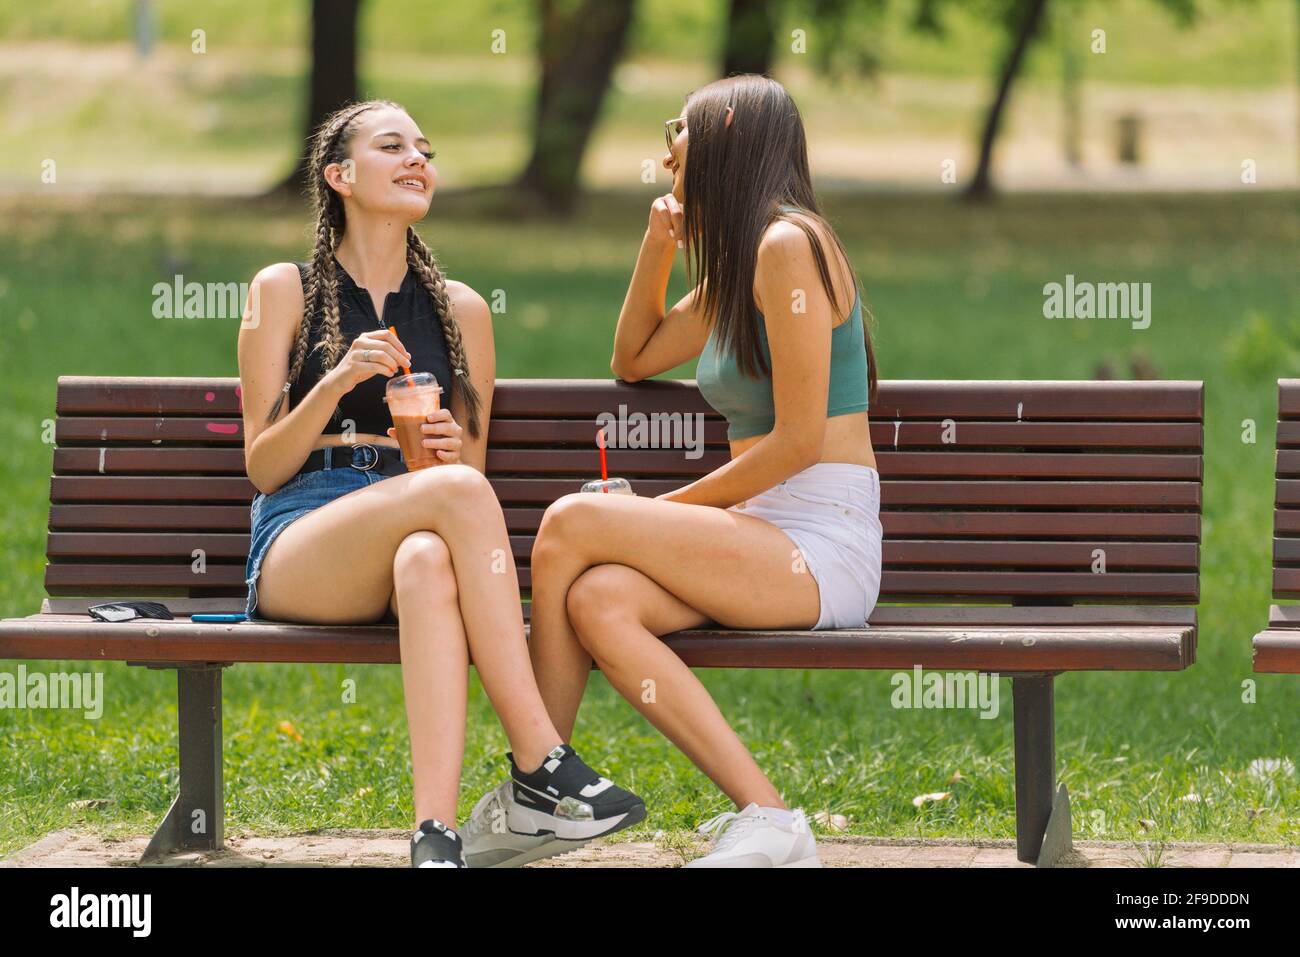 Attractive Two Women Sitting On A Park Bench On A Summer Day Stock